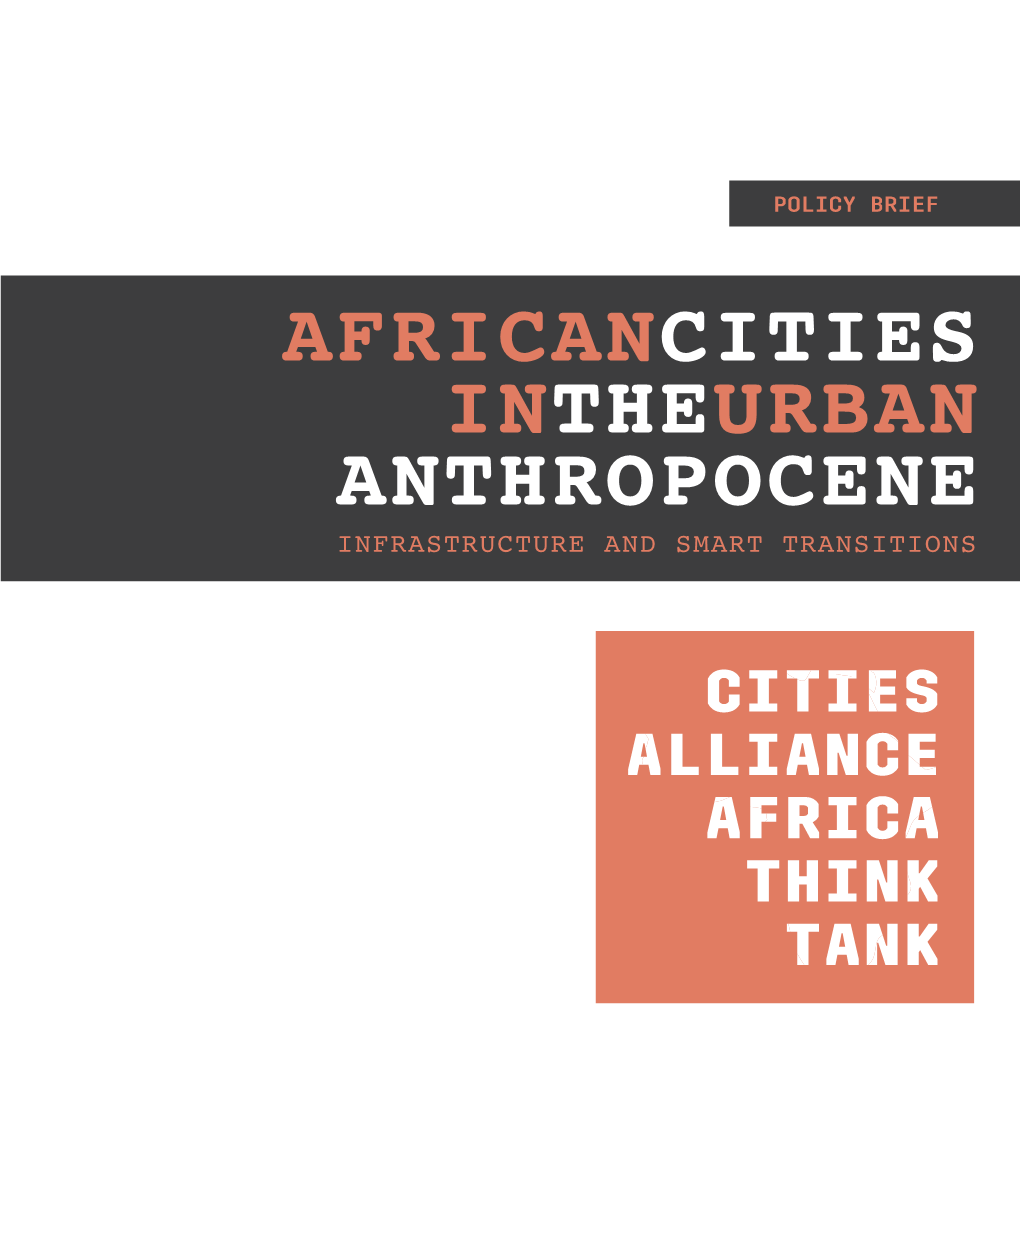 Africancities Intheurban Anthropocene Infrastructure and Smart Transitions